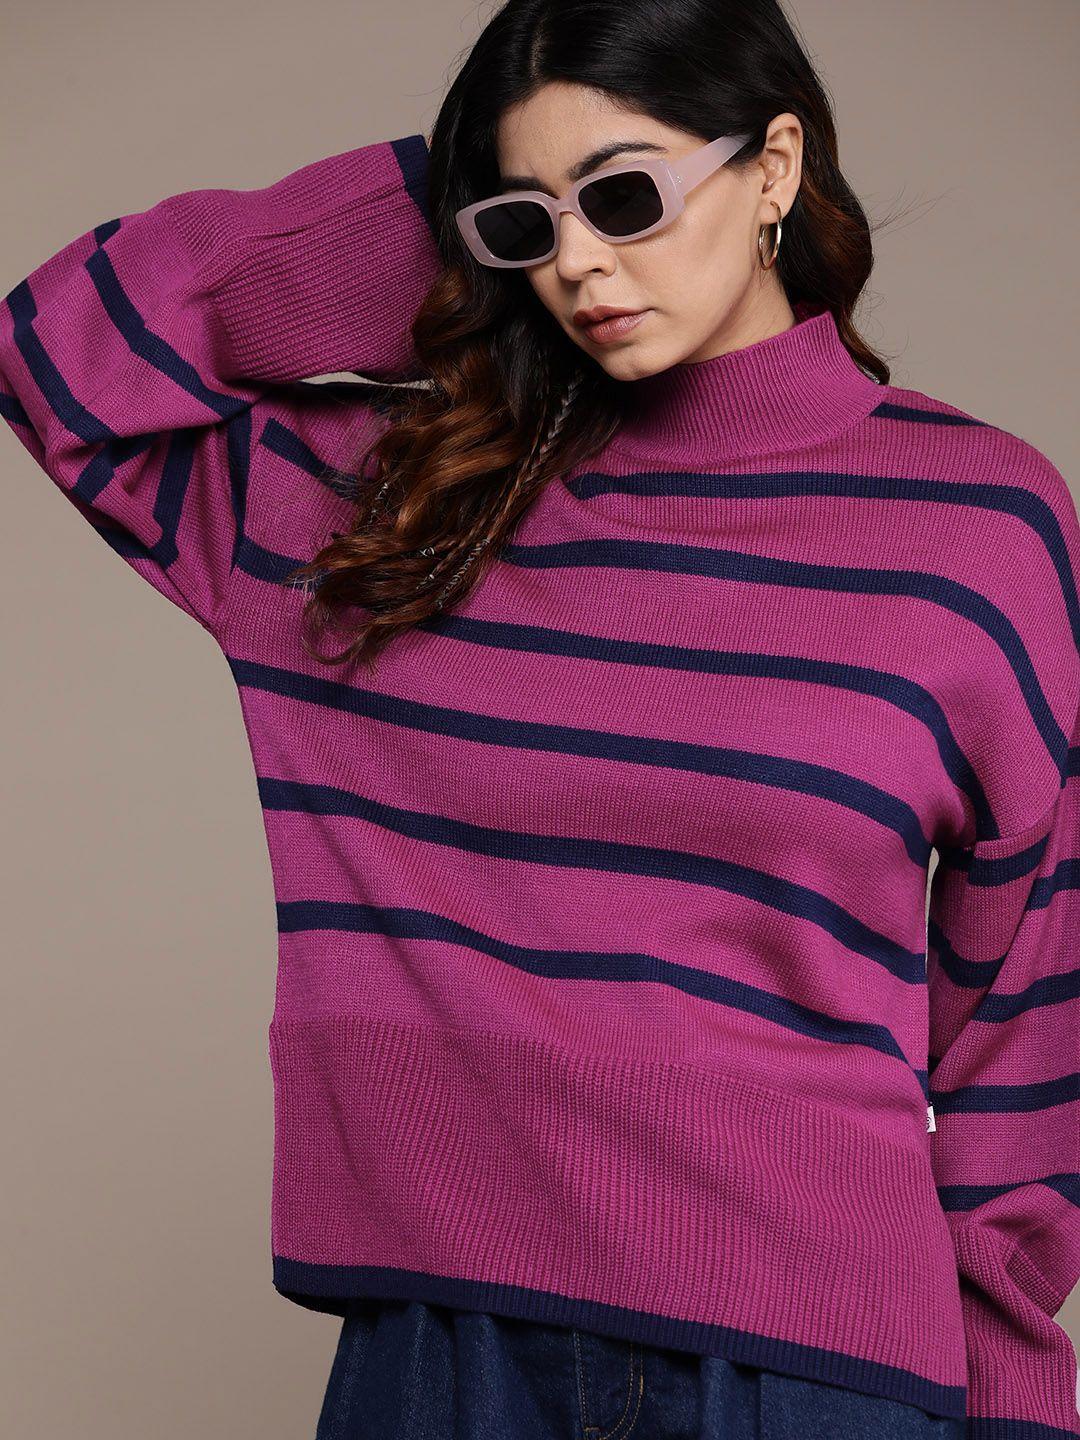 the-roadster-lifestyle-co.-flared-sleeves-striped-pullover